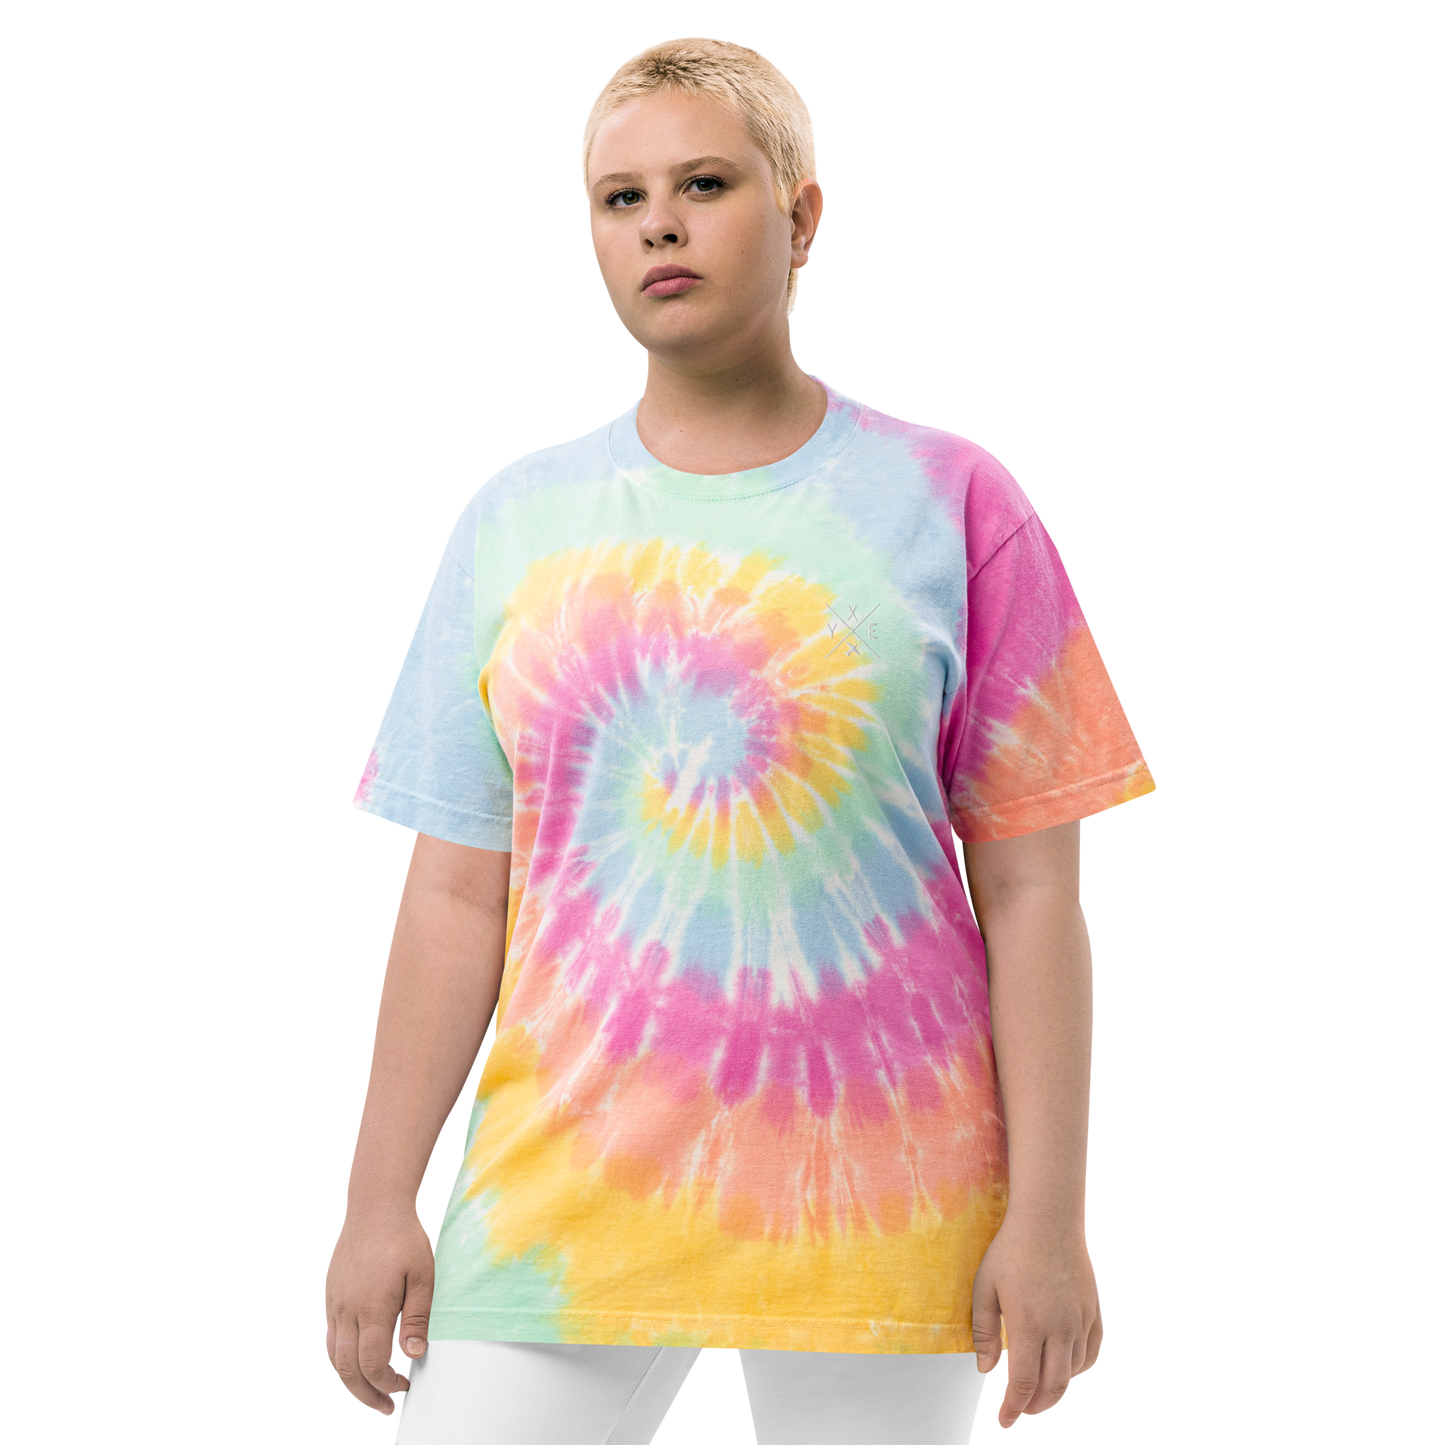 YHM Designs - YXE Saskatoon Oversized Tie-Dye T-Shirt - Crossed-X Design with Airport Code and Vintage Propliner - White Embroidery - Image 11